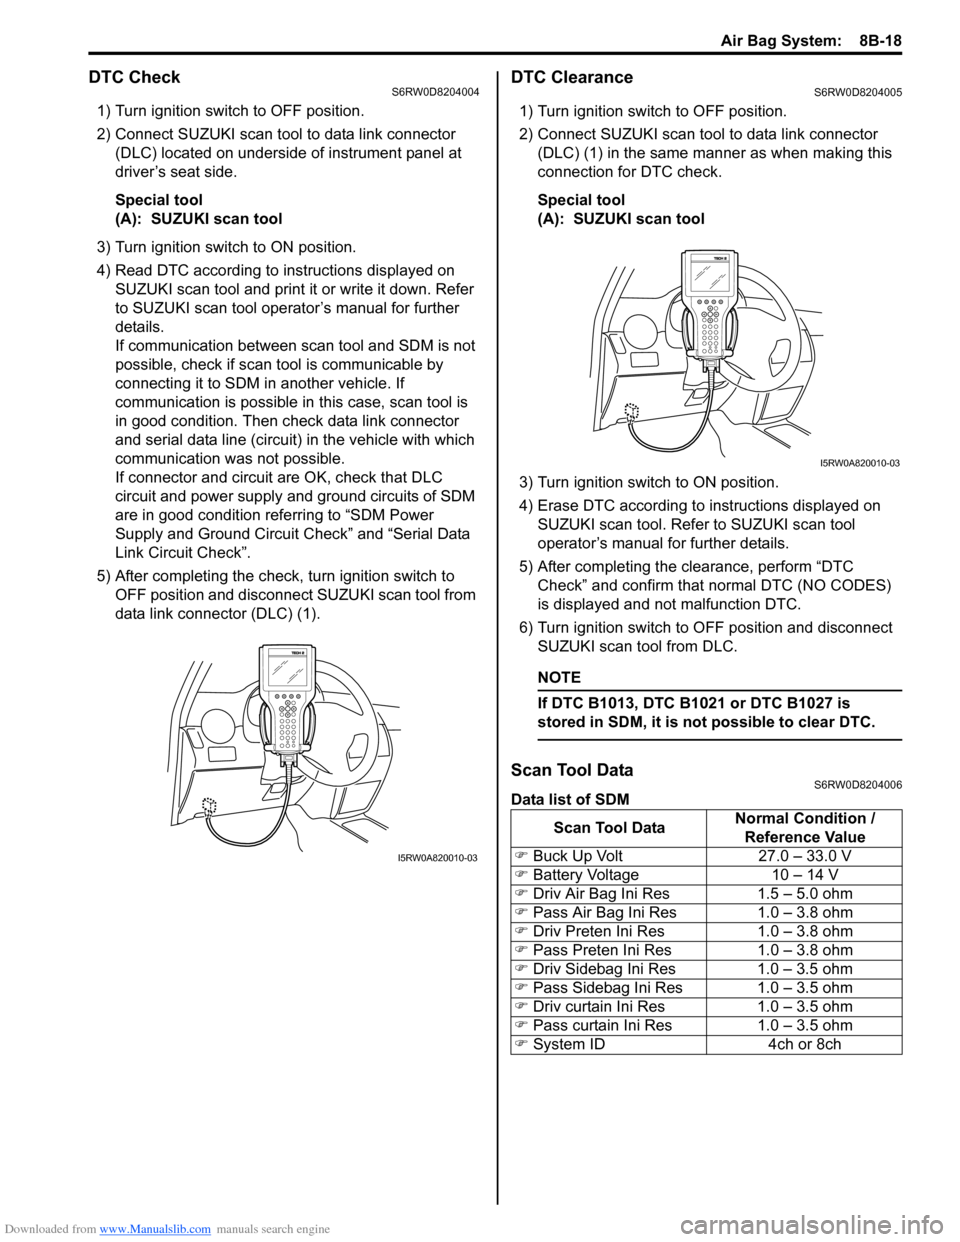 SUZUKI SX4 2006 1.G Service User Guide Downloaded from www.Manualslib.com manuals search engine Air Bag System:  8B-18
DTC CheckS6RW0D8204004
1) Turn ignition switch to OFF position.
2) Connect SUZUKI scan tool to data link connector 
(DLC